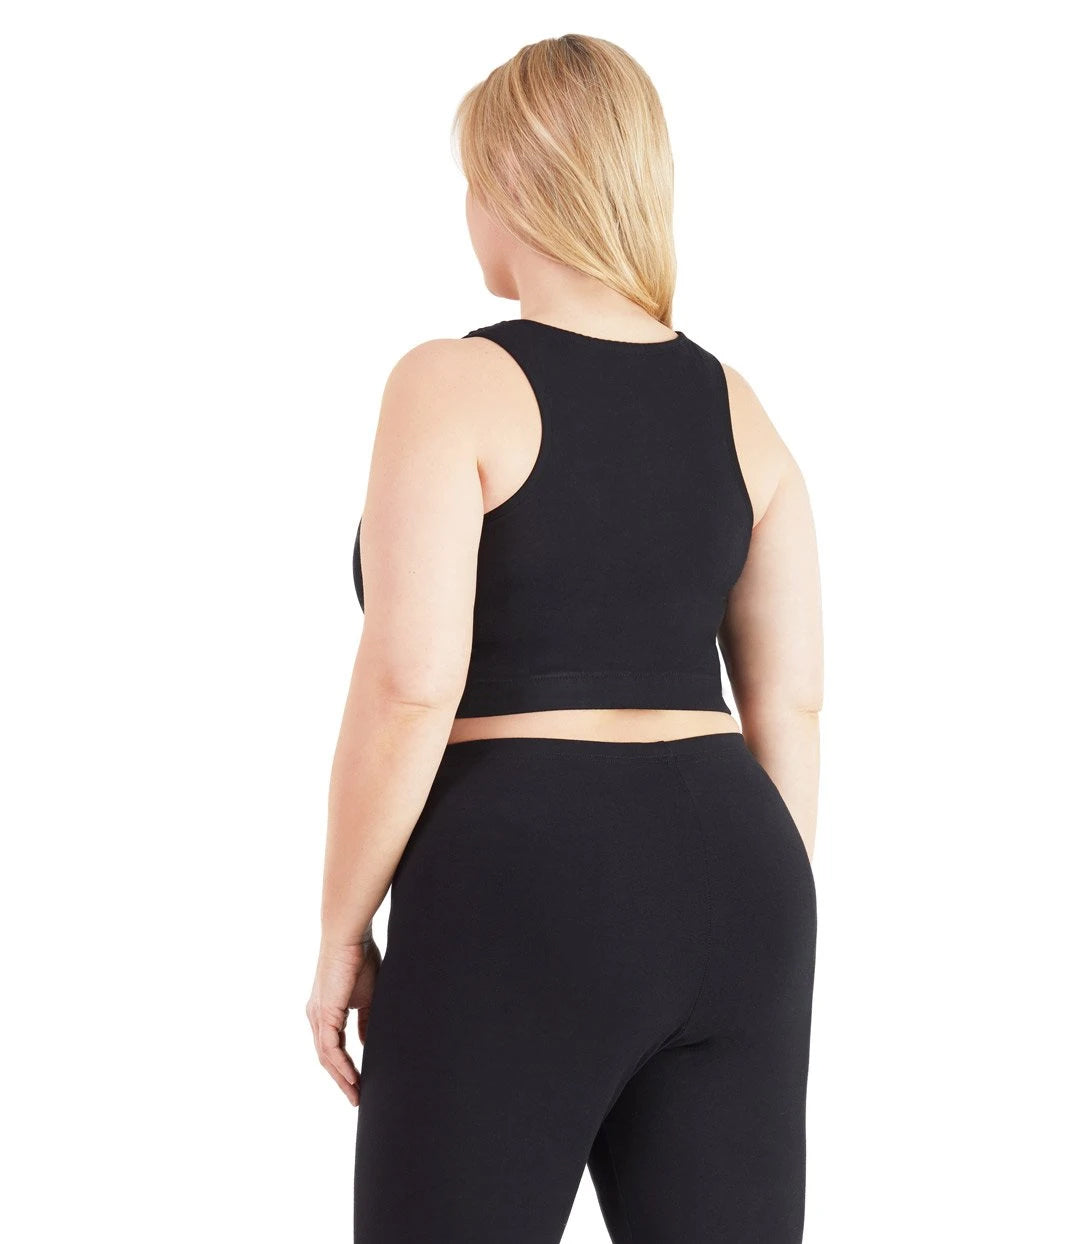 Plus size woman, facing back, wearing JunoActive plus size Stretch Naturals V-Neck Bra top in black. The woman is wearing black JunoActive plus size leggings. Her arms fall naturally to her side.